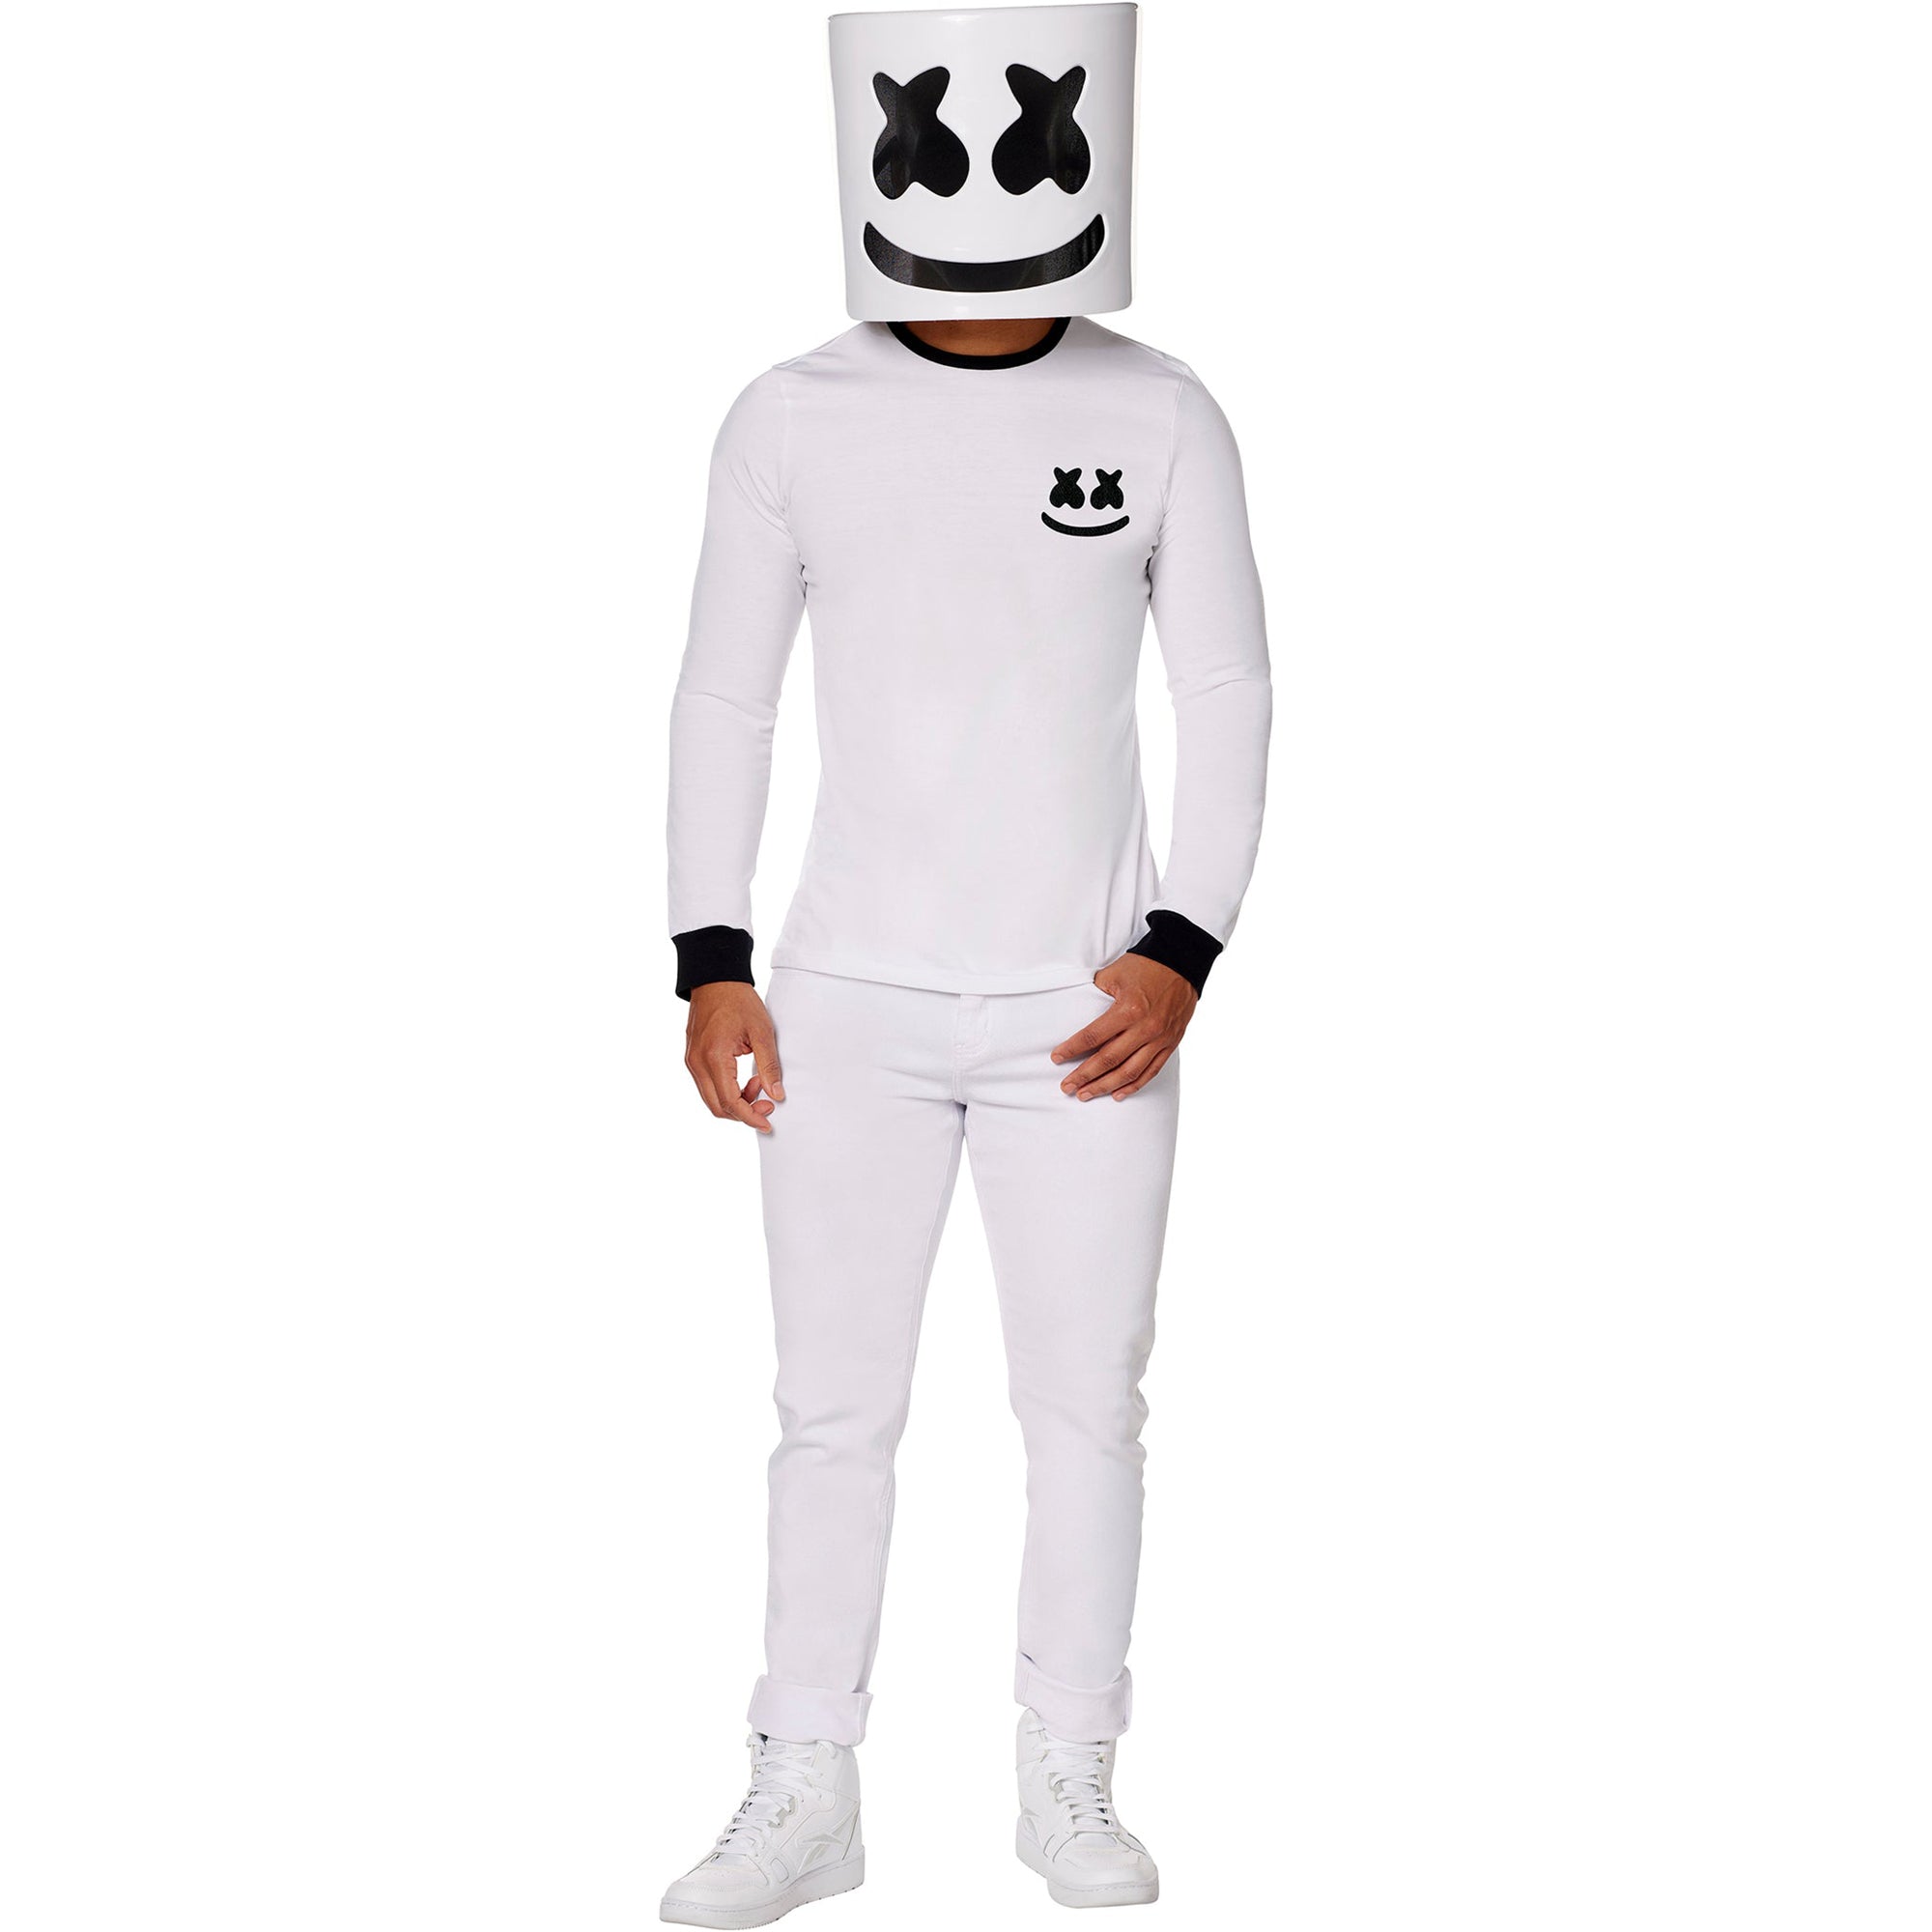 DJ Marshmello Costume for Adults – Party Expert